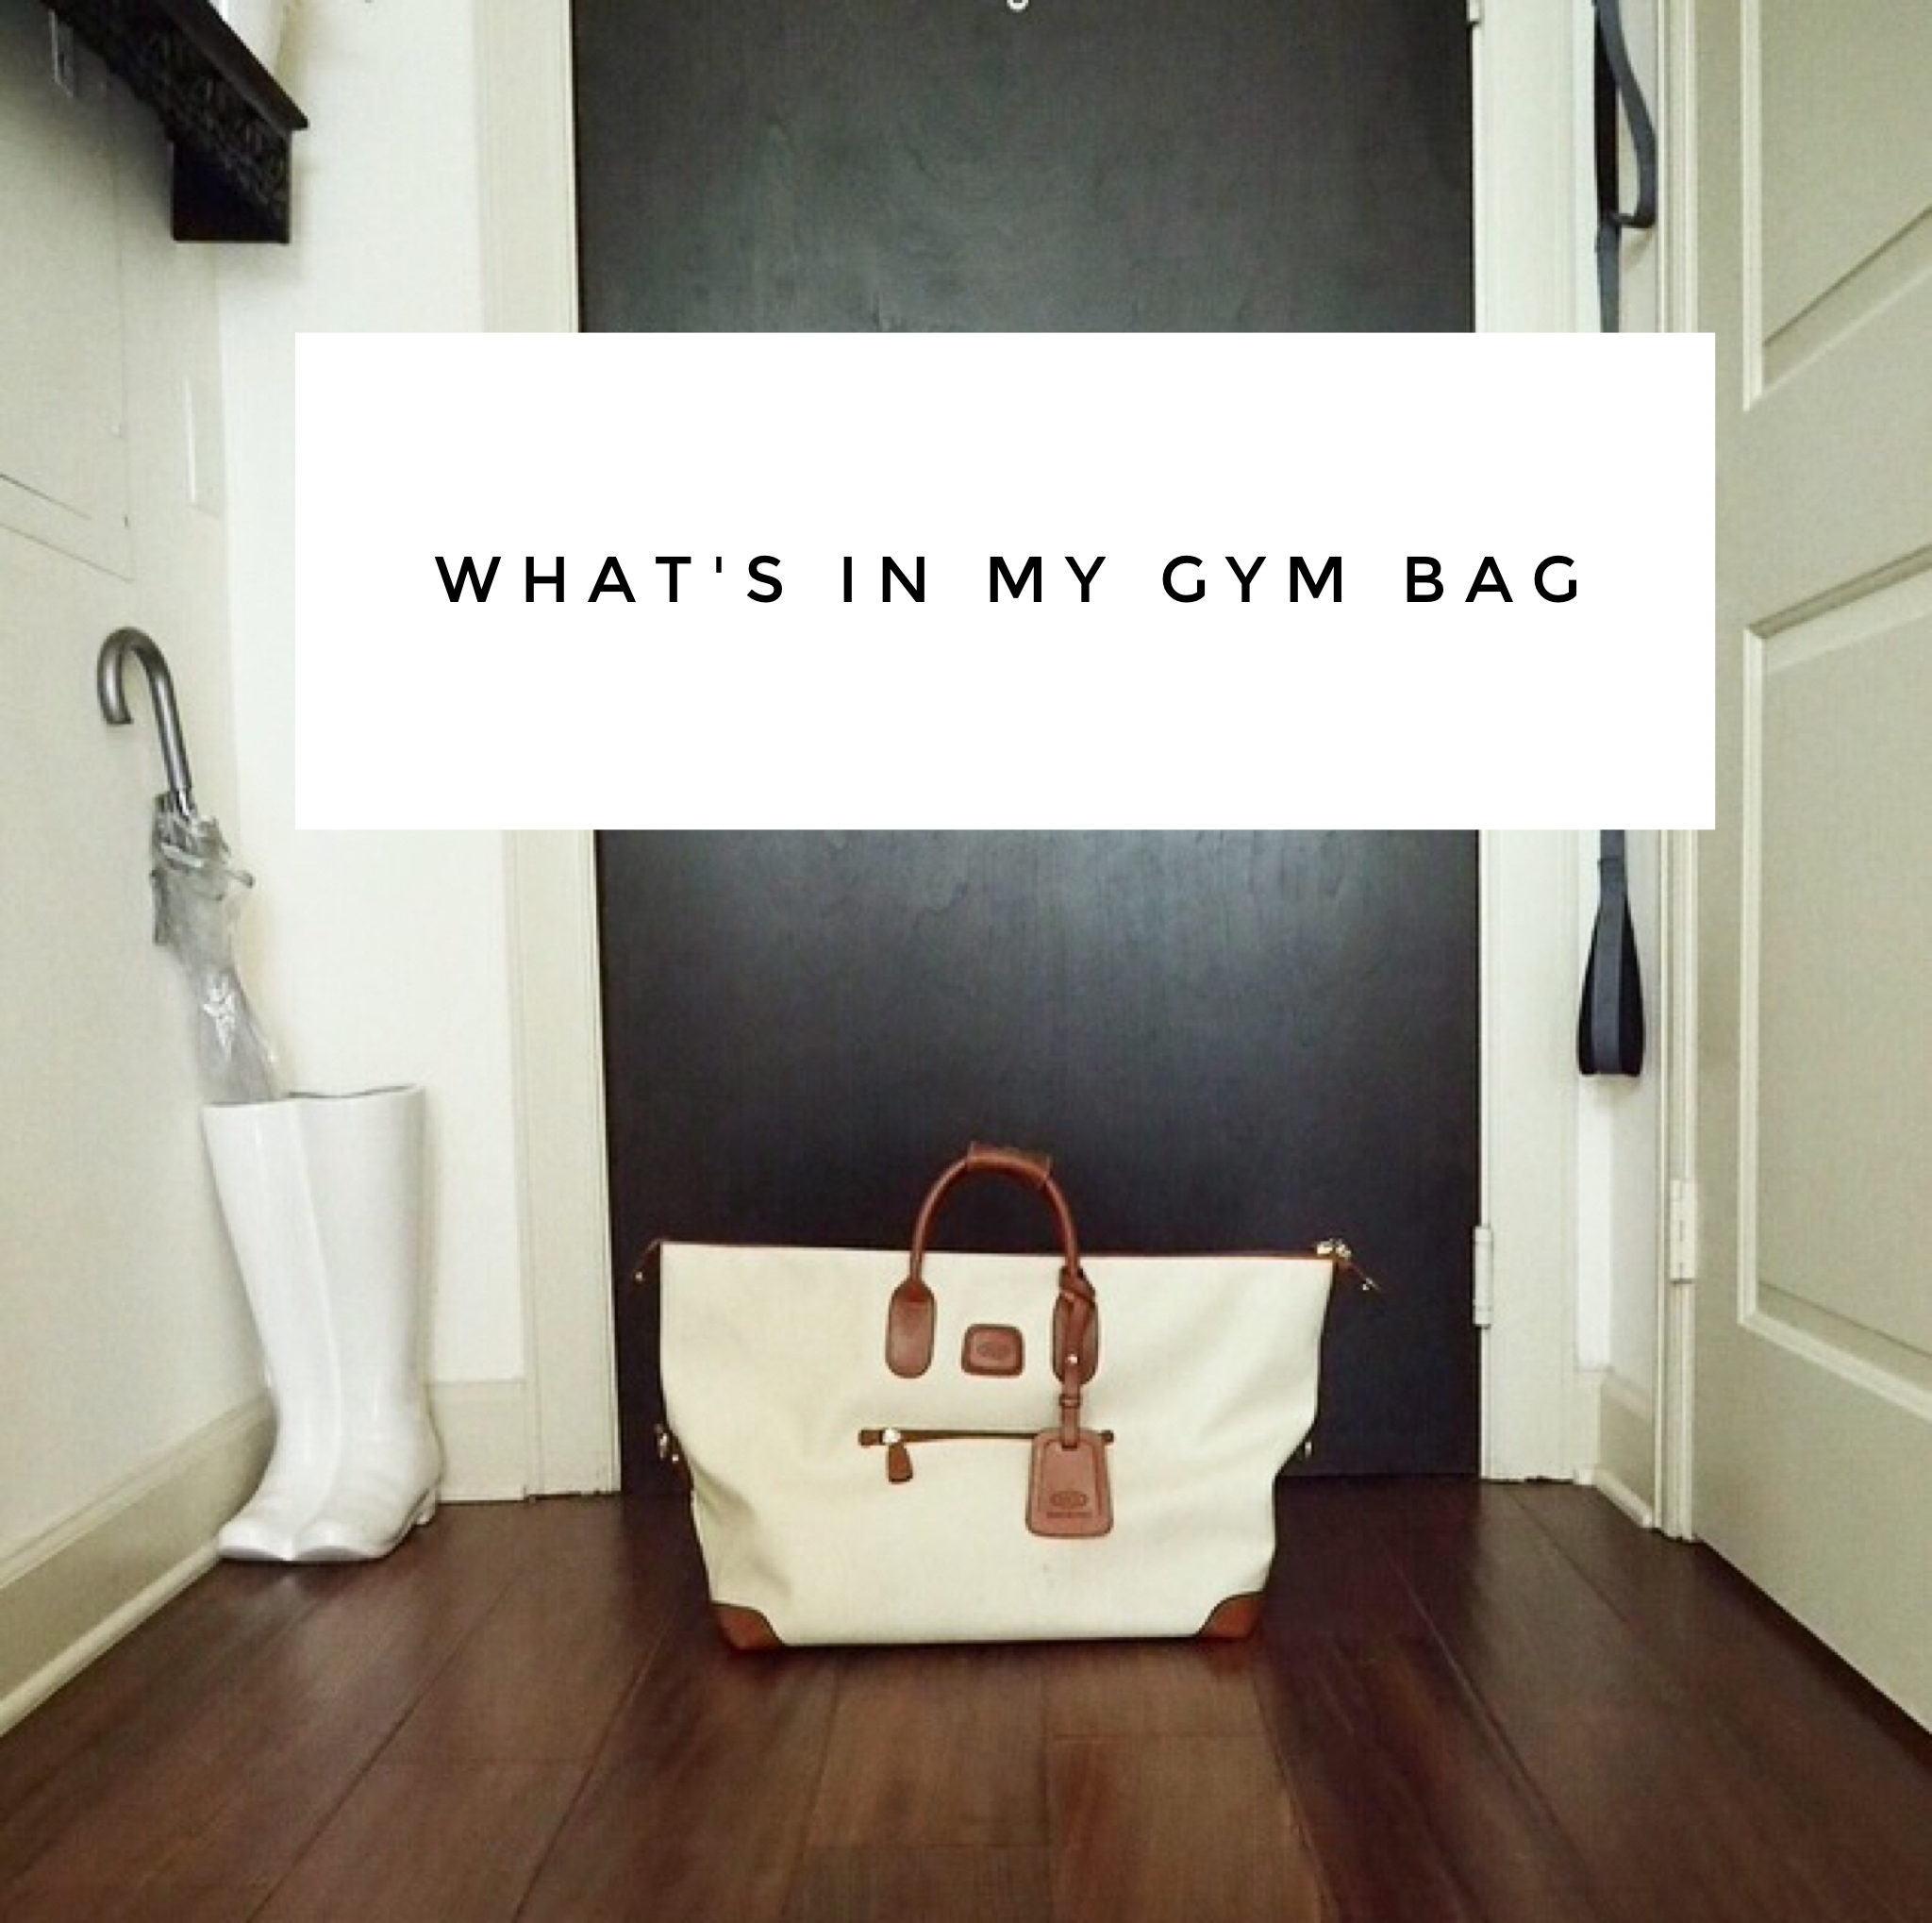 whats-in-my-gym-bag